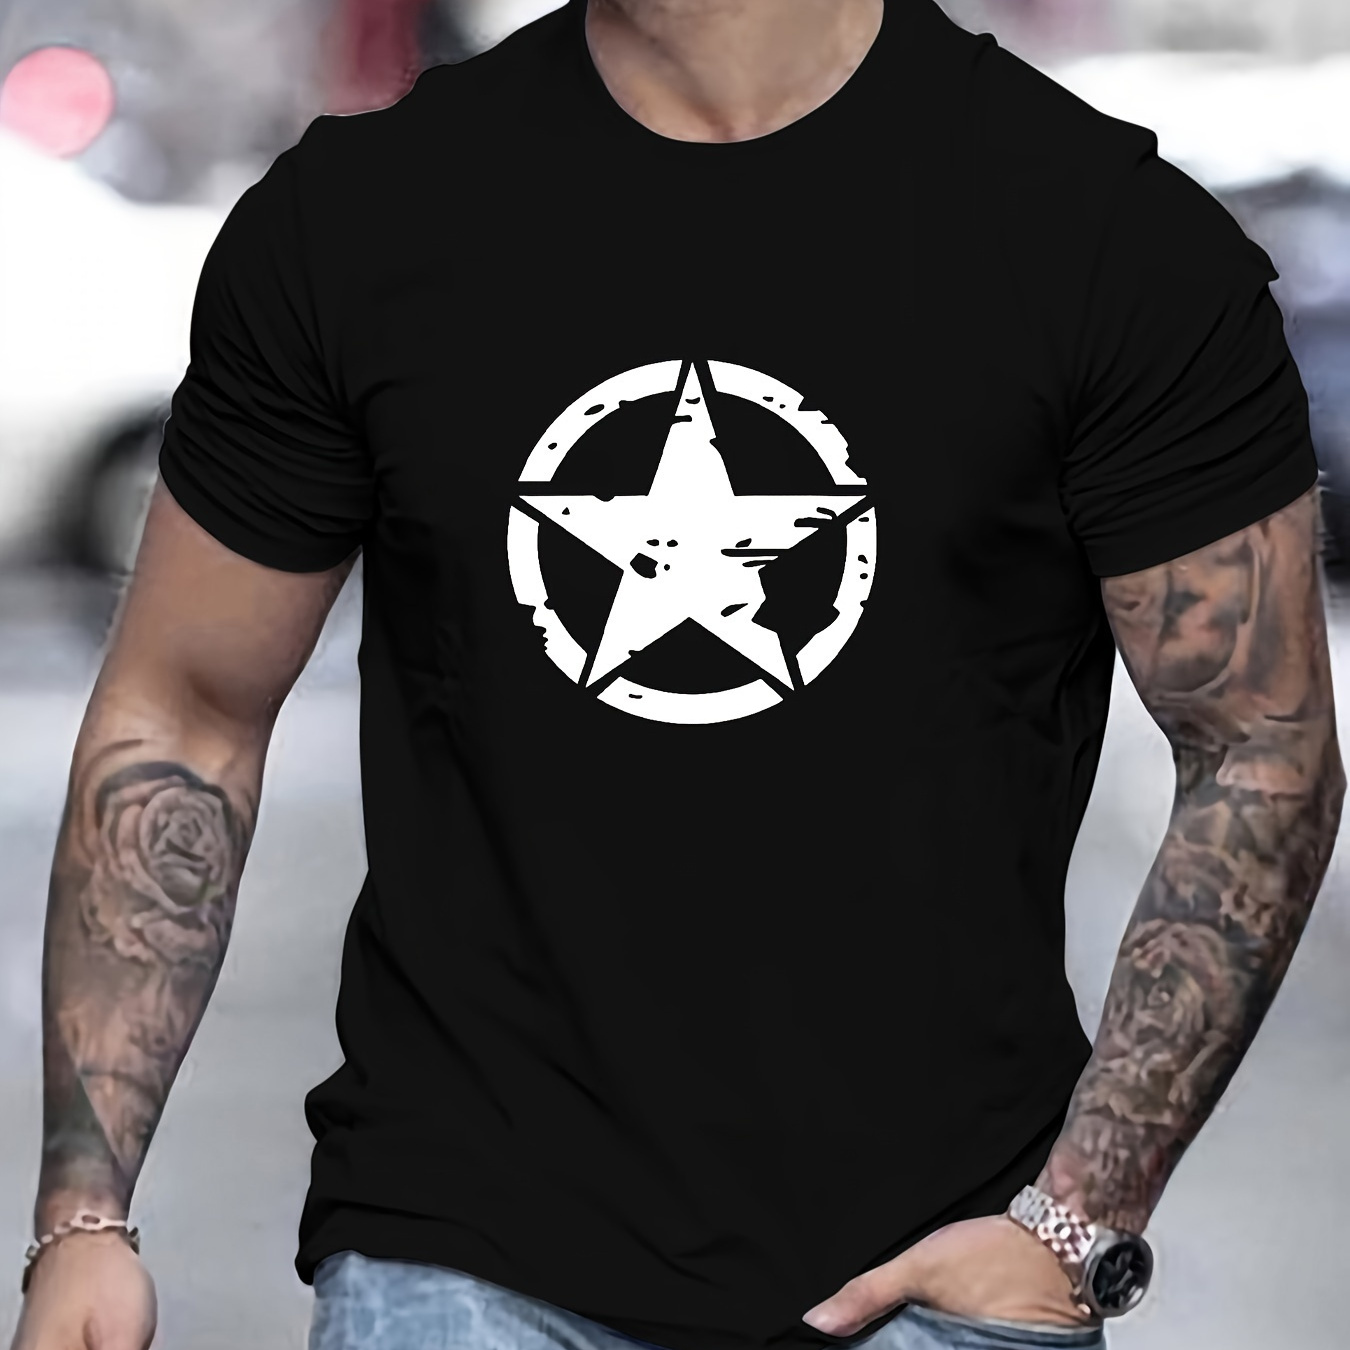 

Star Logo Graphic Print, Men's Novel Graphic Design T-shirt, Casual Comfy Tees For Summer, Men's Clothing Tops For Daily Activities